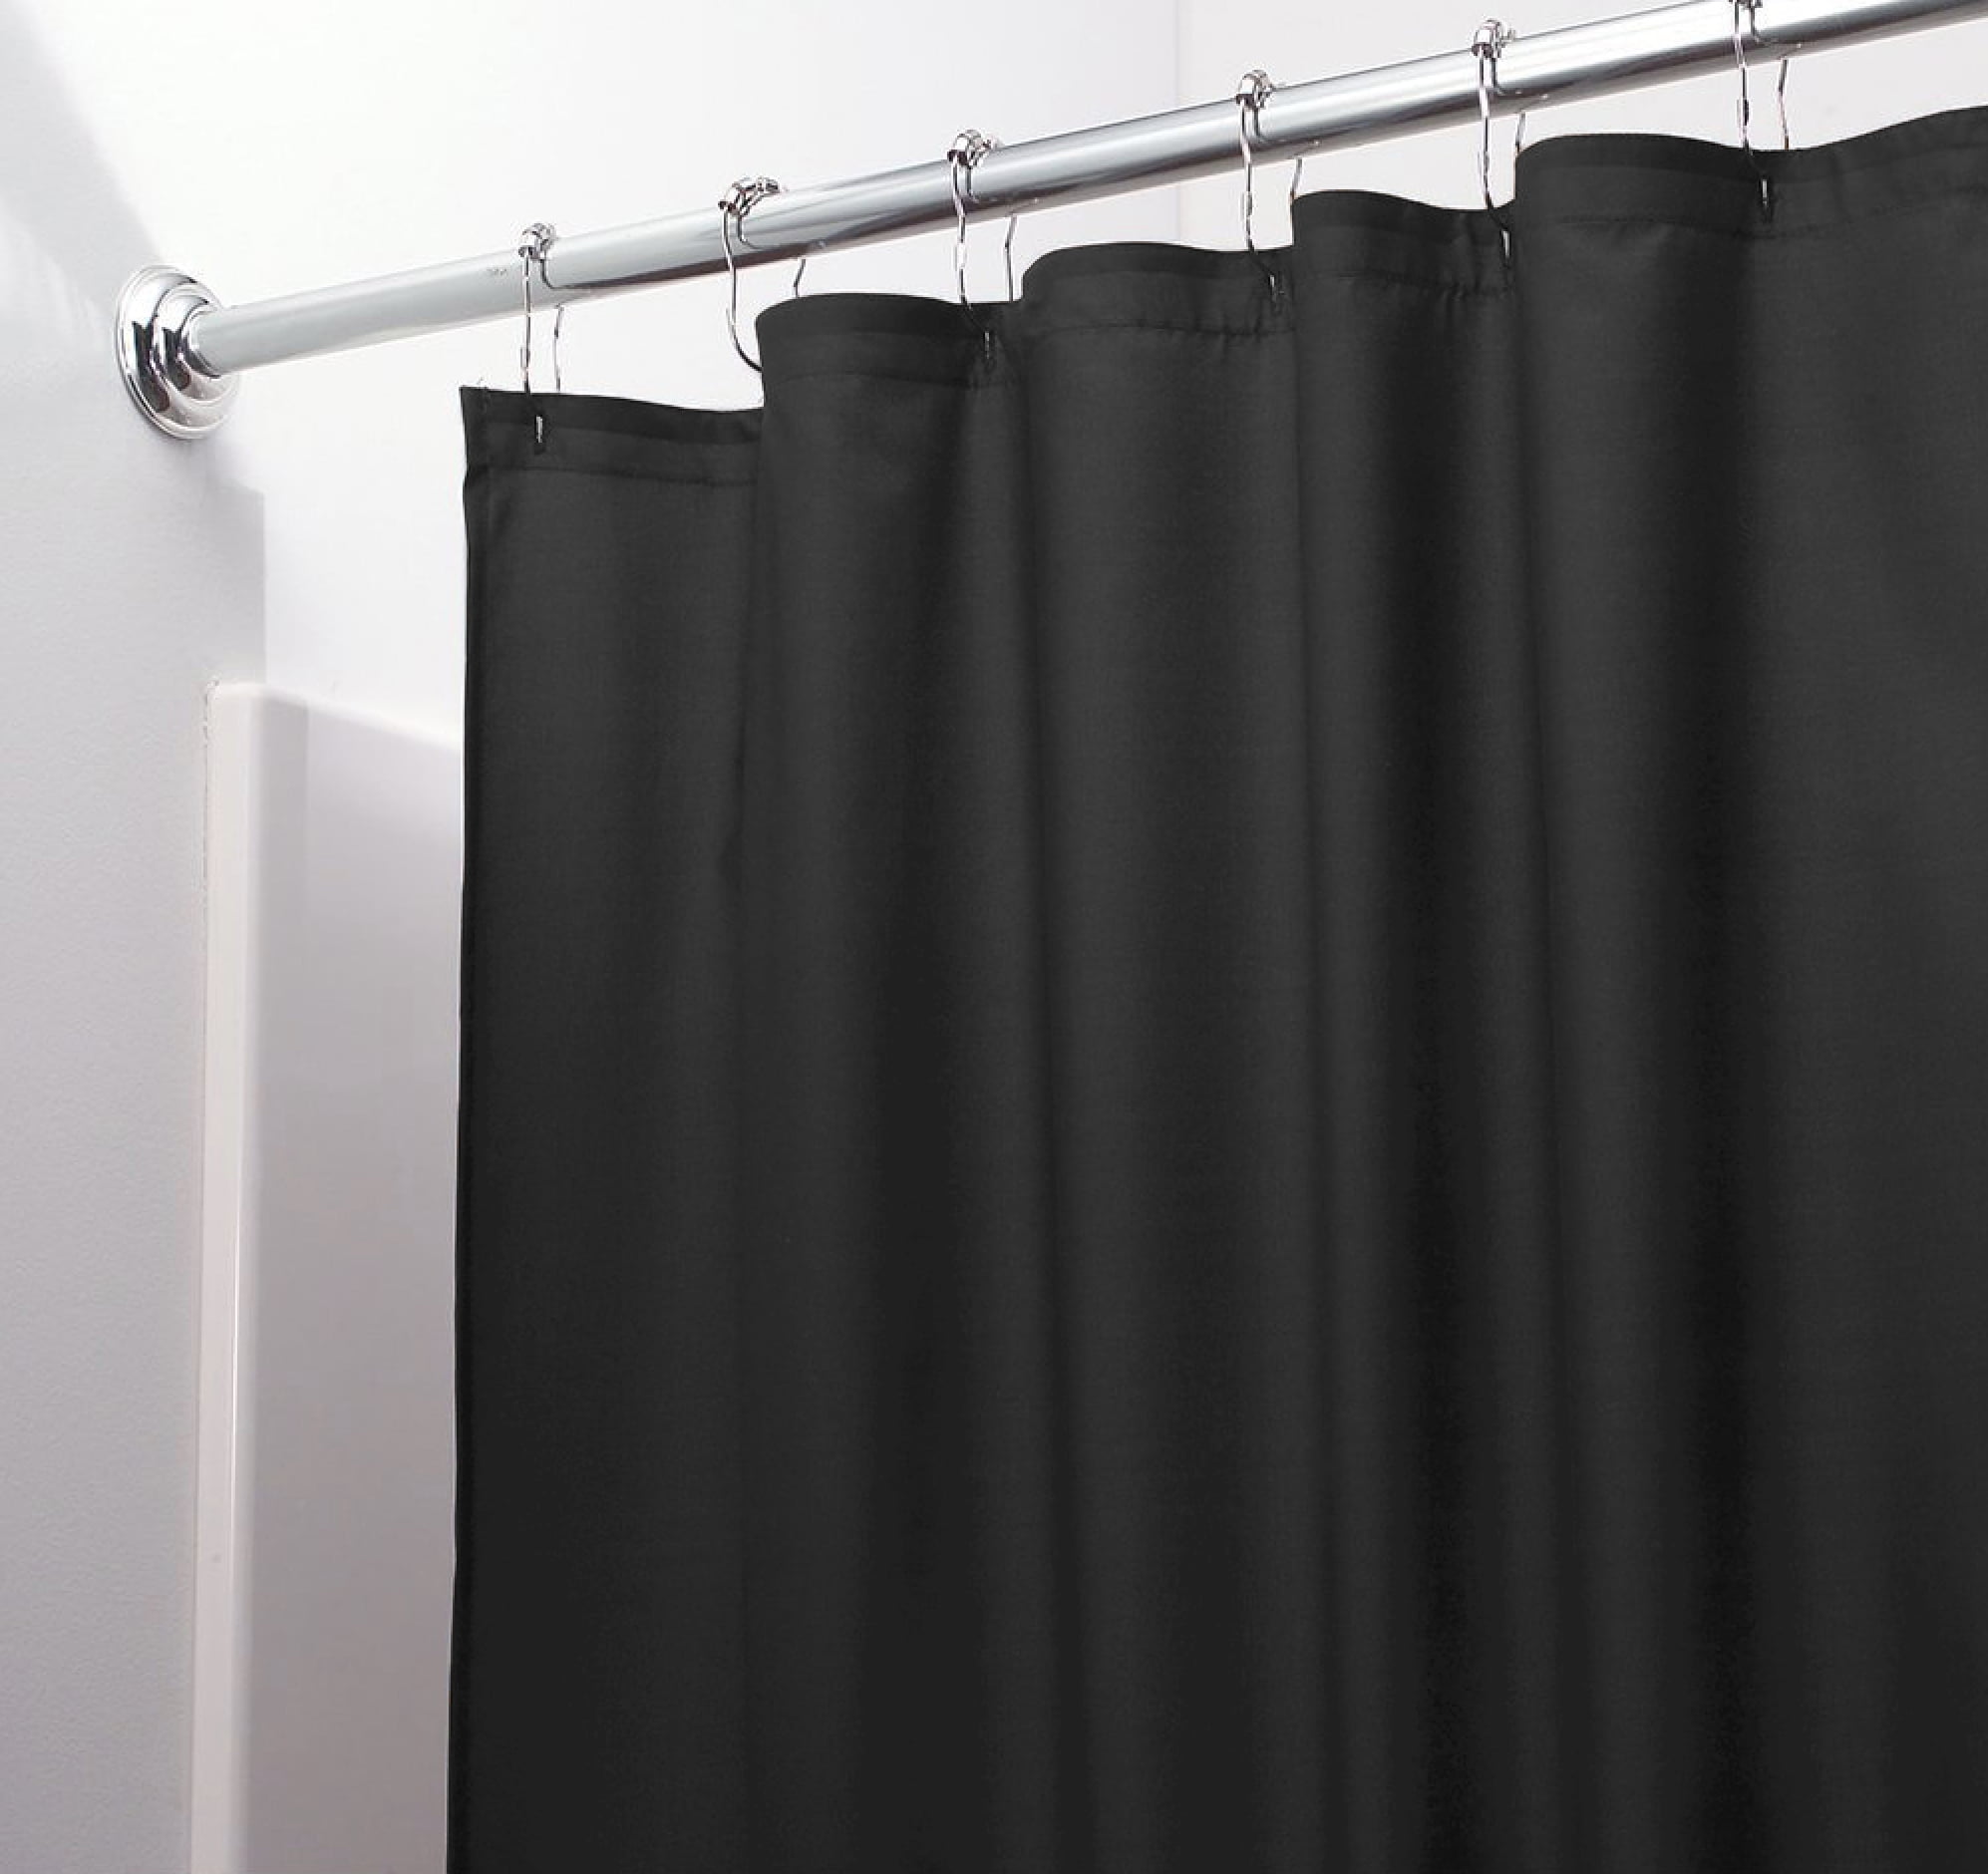 Mold Mildew Resistant Fabric Shower, How To Clean Mildew Shower Curtain Liner